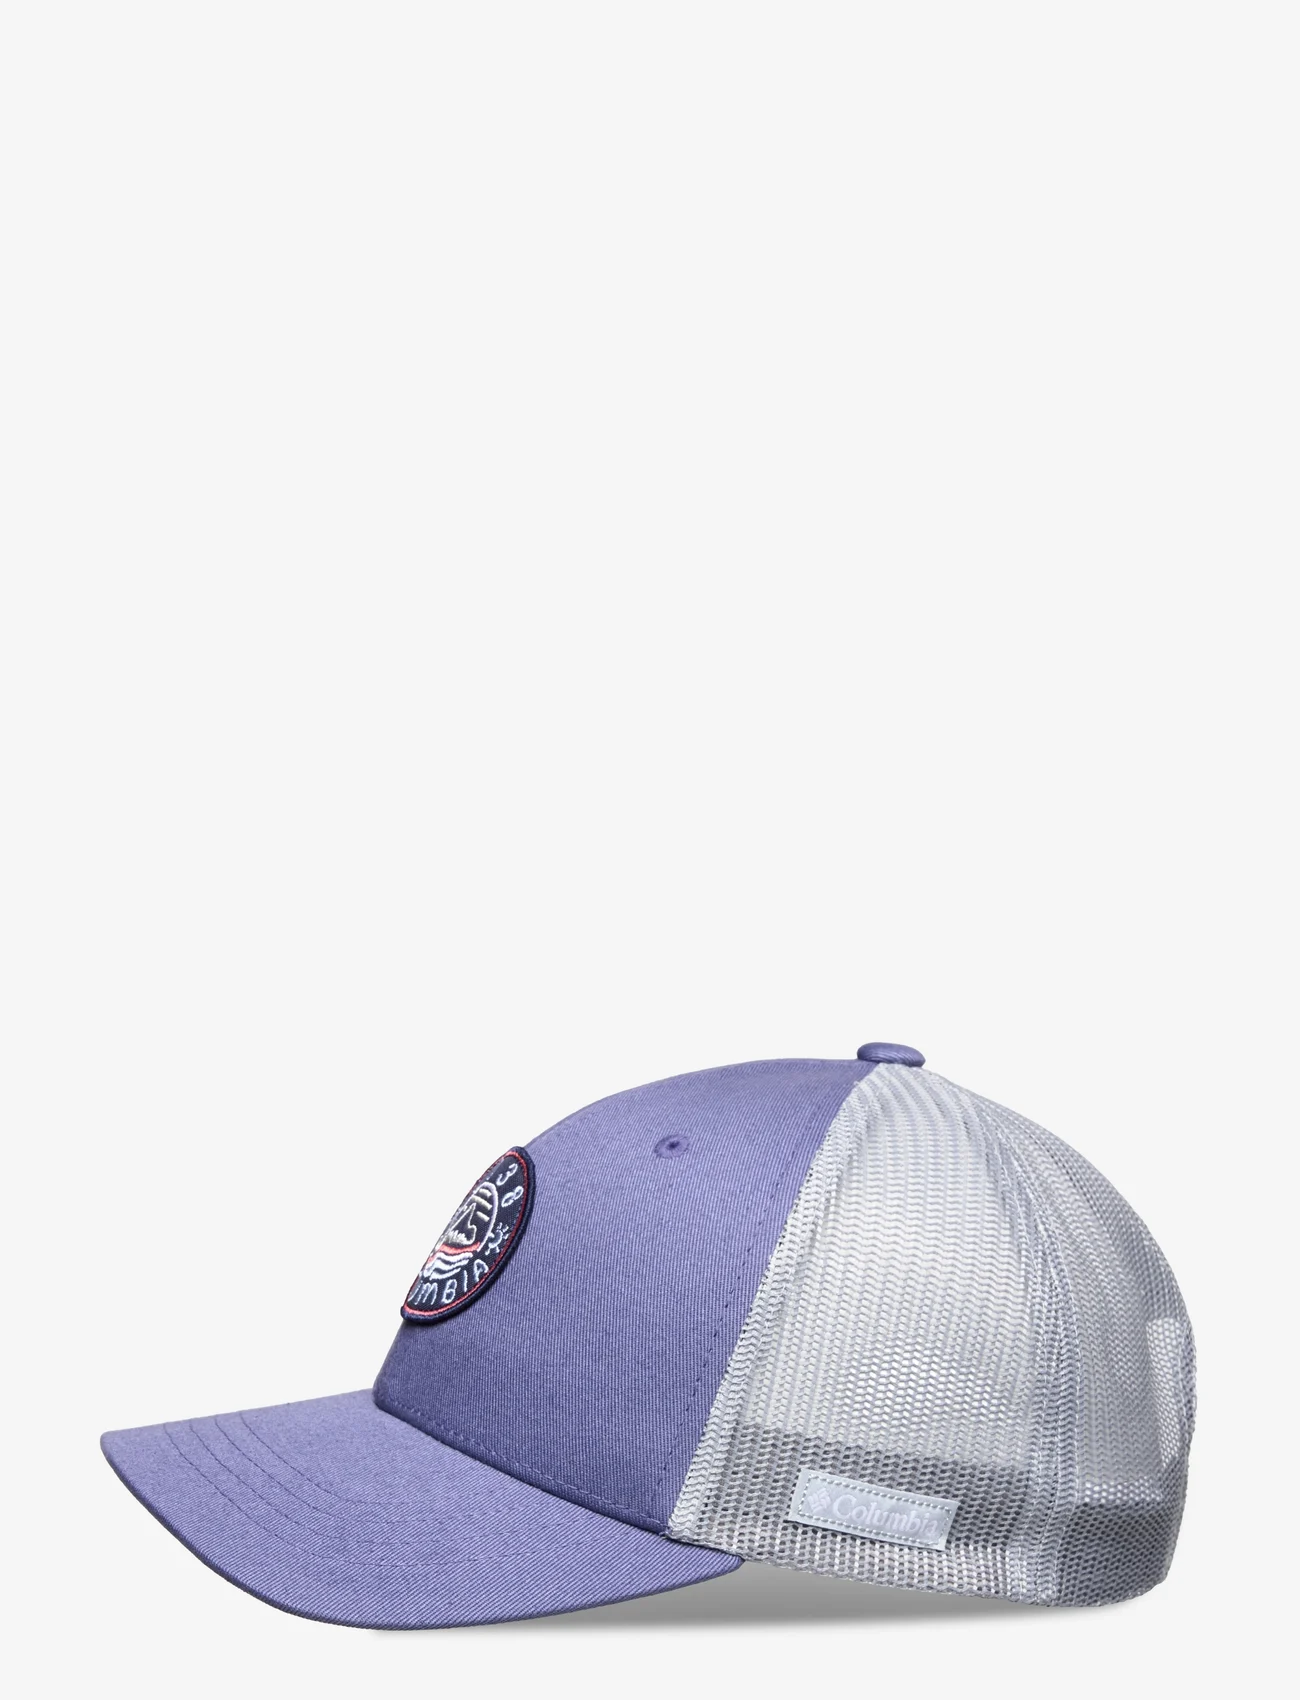 Columbia Sportswear - Columbia Youth Snap Back - sommerkupp - eve, cirrus grey, hot marker waves - 1